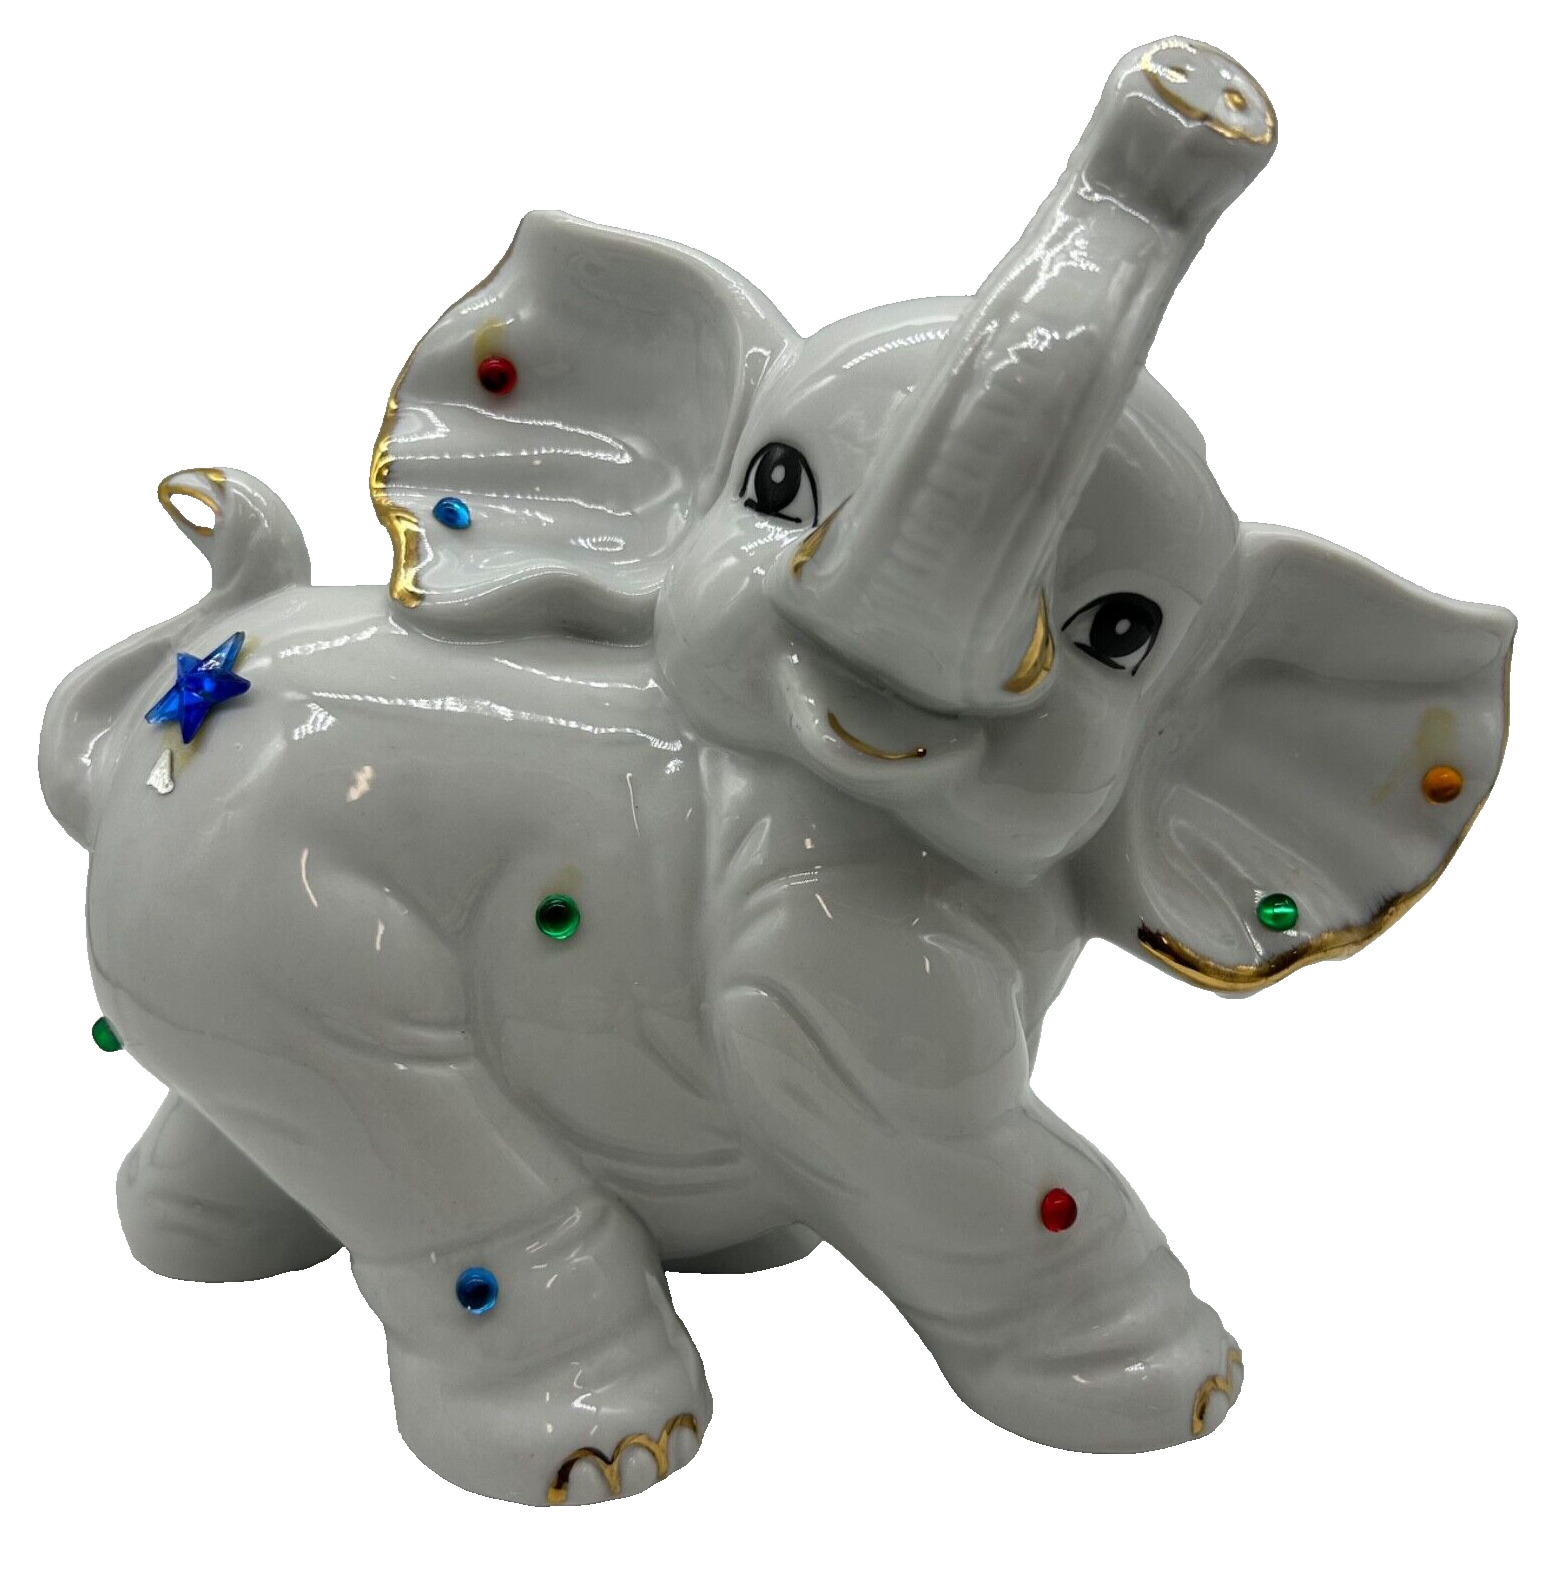 New Cute & Gorgeous White Elephant Calf Smiling with Golden Accents Figurine